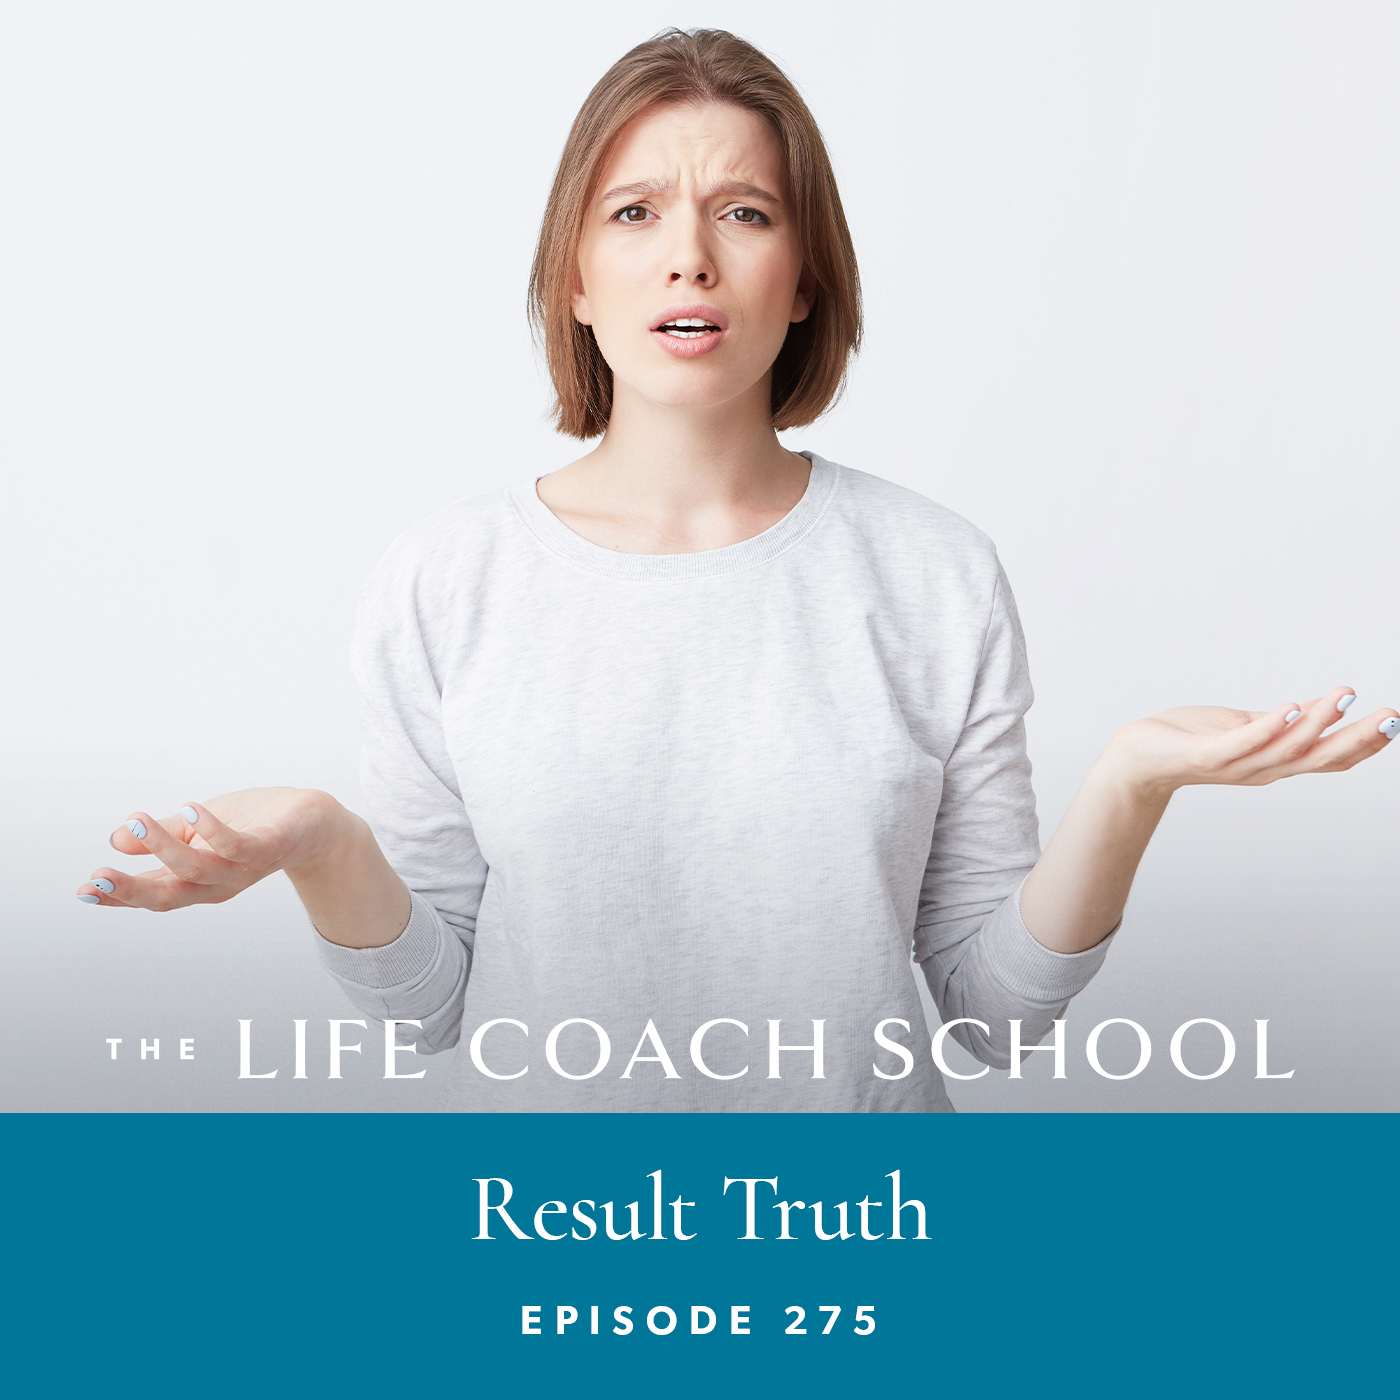 The Life Coach School Podcast with Brooke Castillo | Episode 275 | Result Truth